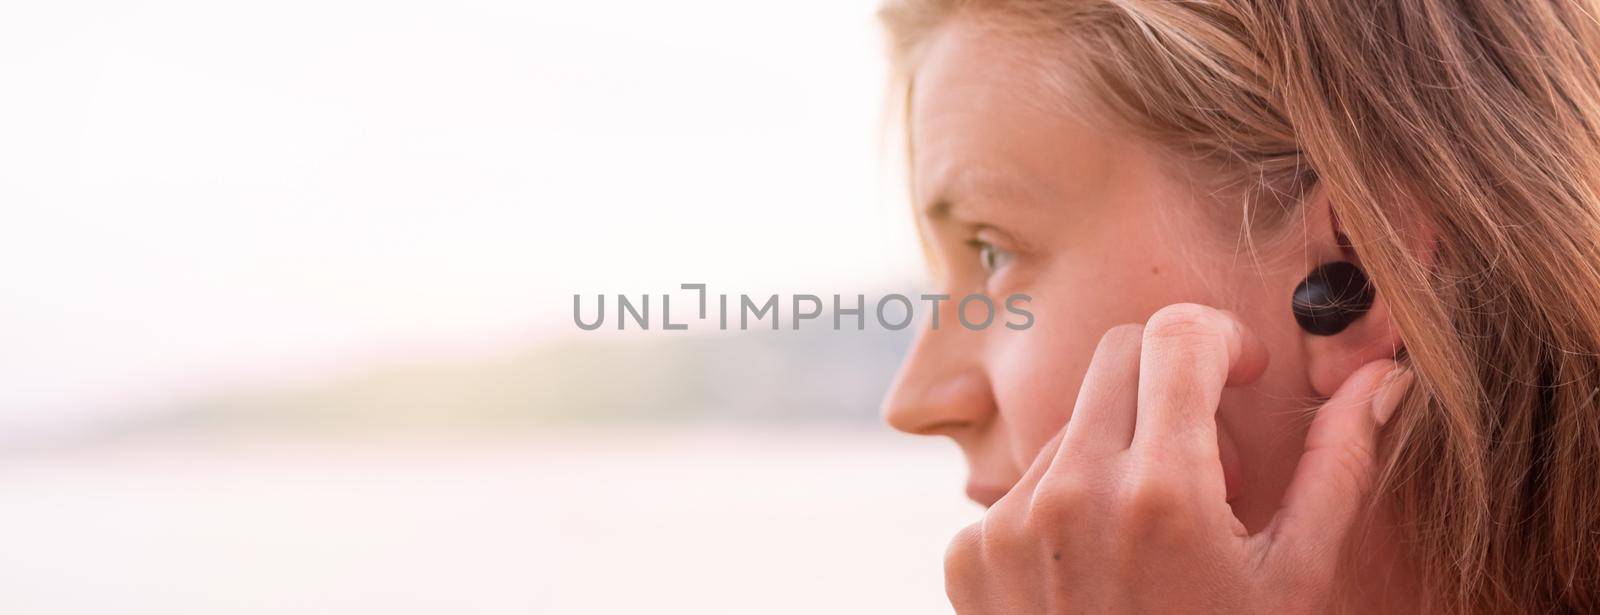 Technology concept. Woman using wireless earbuds, seaside on the background, banner